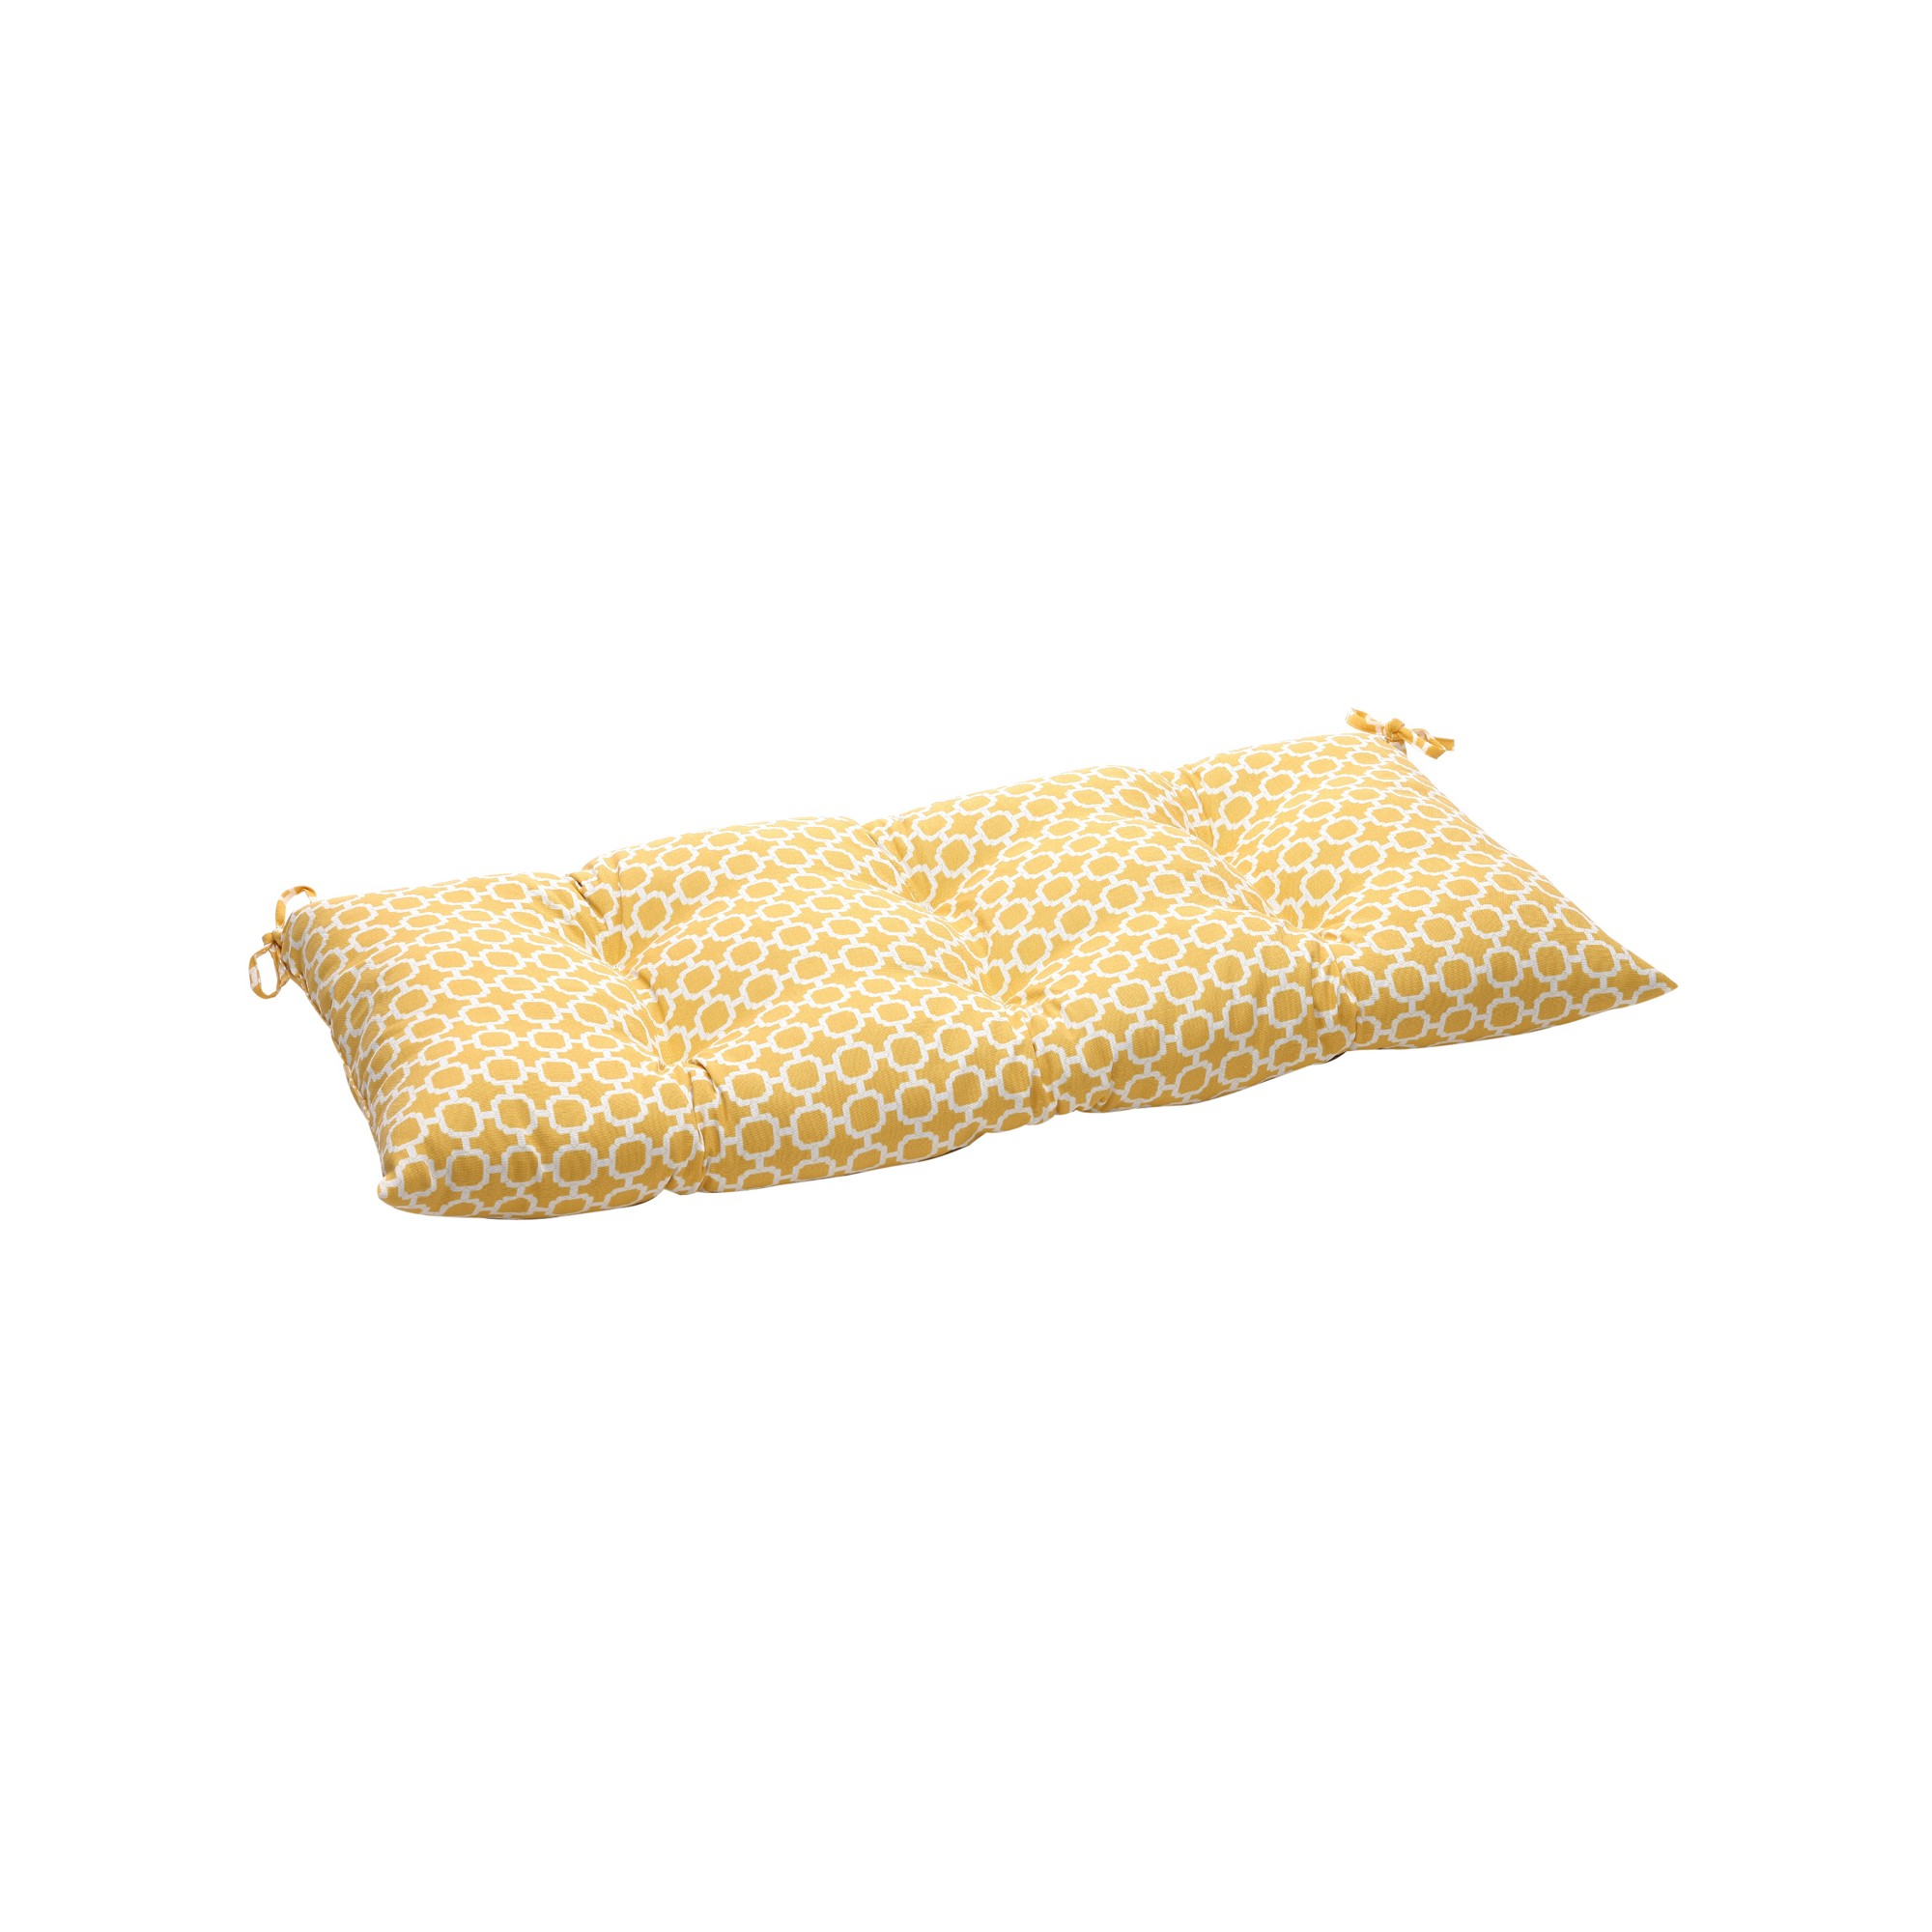 Outdoor Tufted Bench/Loveseat/Swing Cushion - Yellow/White Geometric - Pillow Perfect